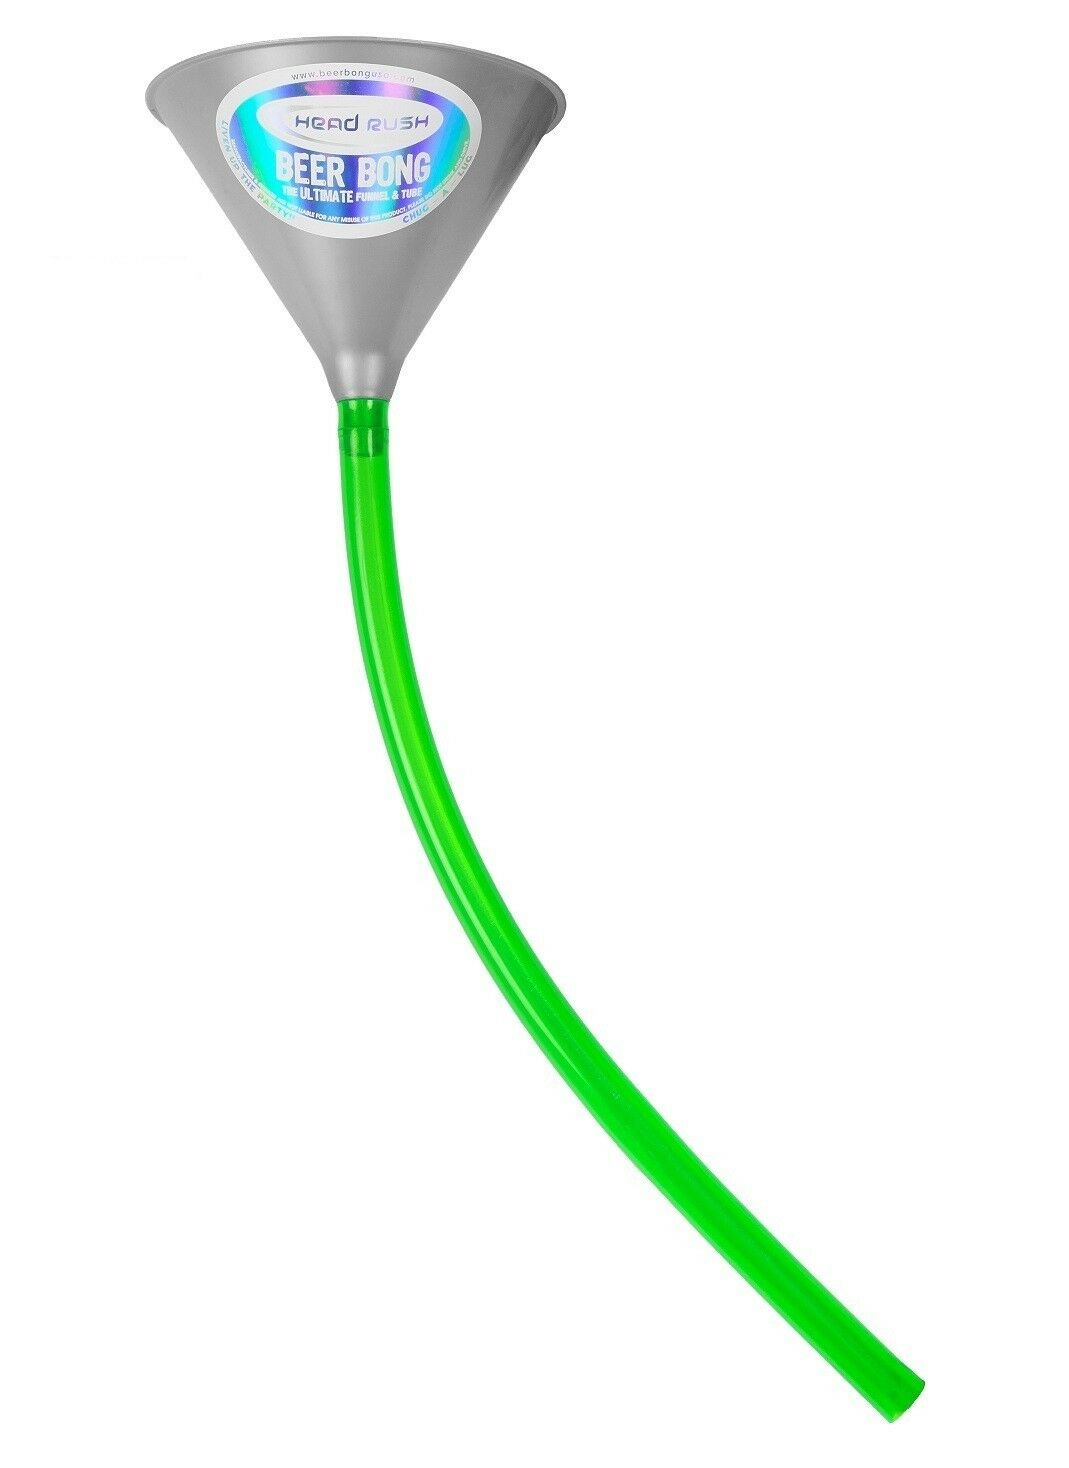 Head Rush Ultimate Beer Bong Green And Silver 24 Inch Funnel And Tube Holds 48oz